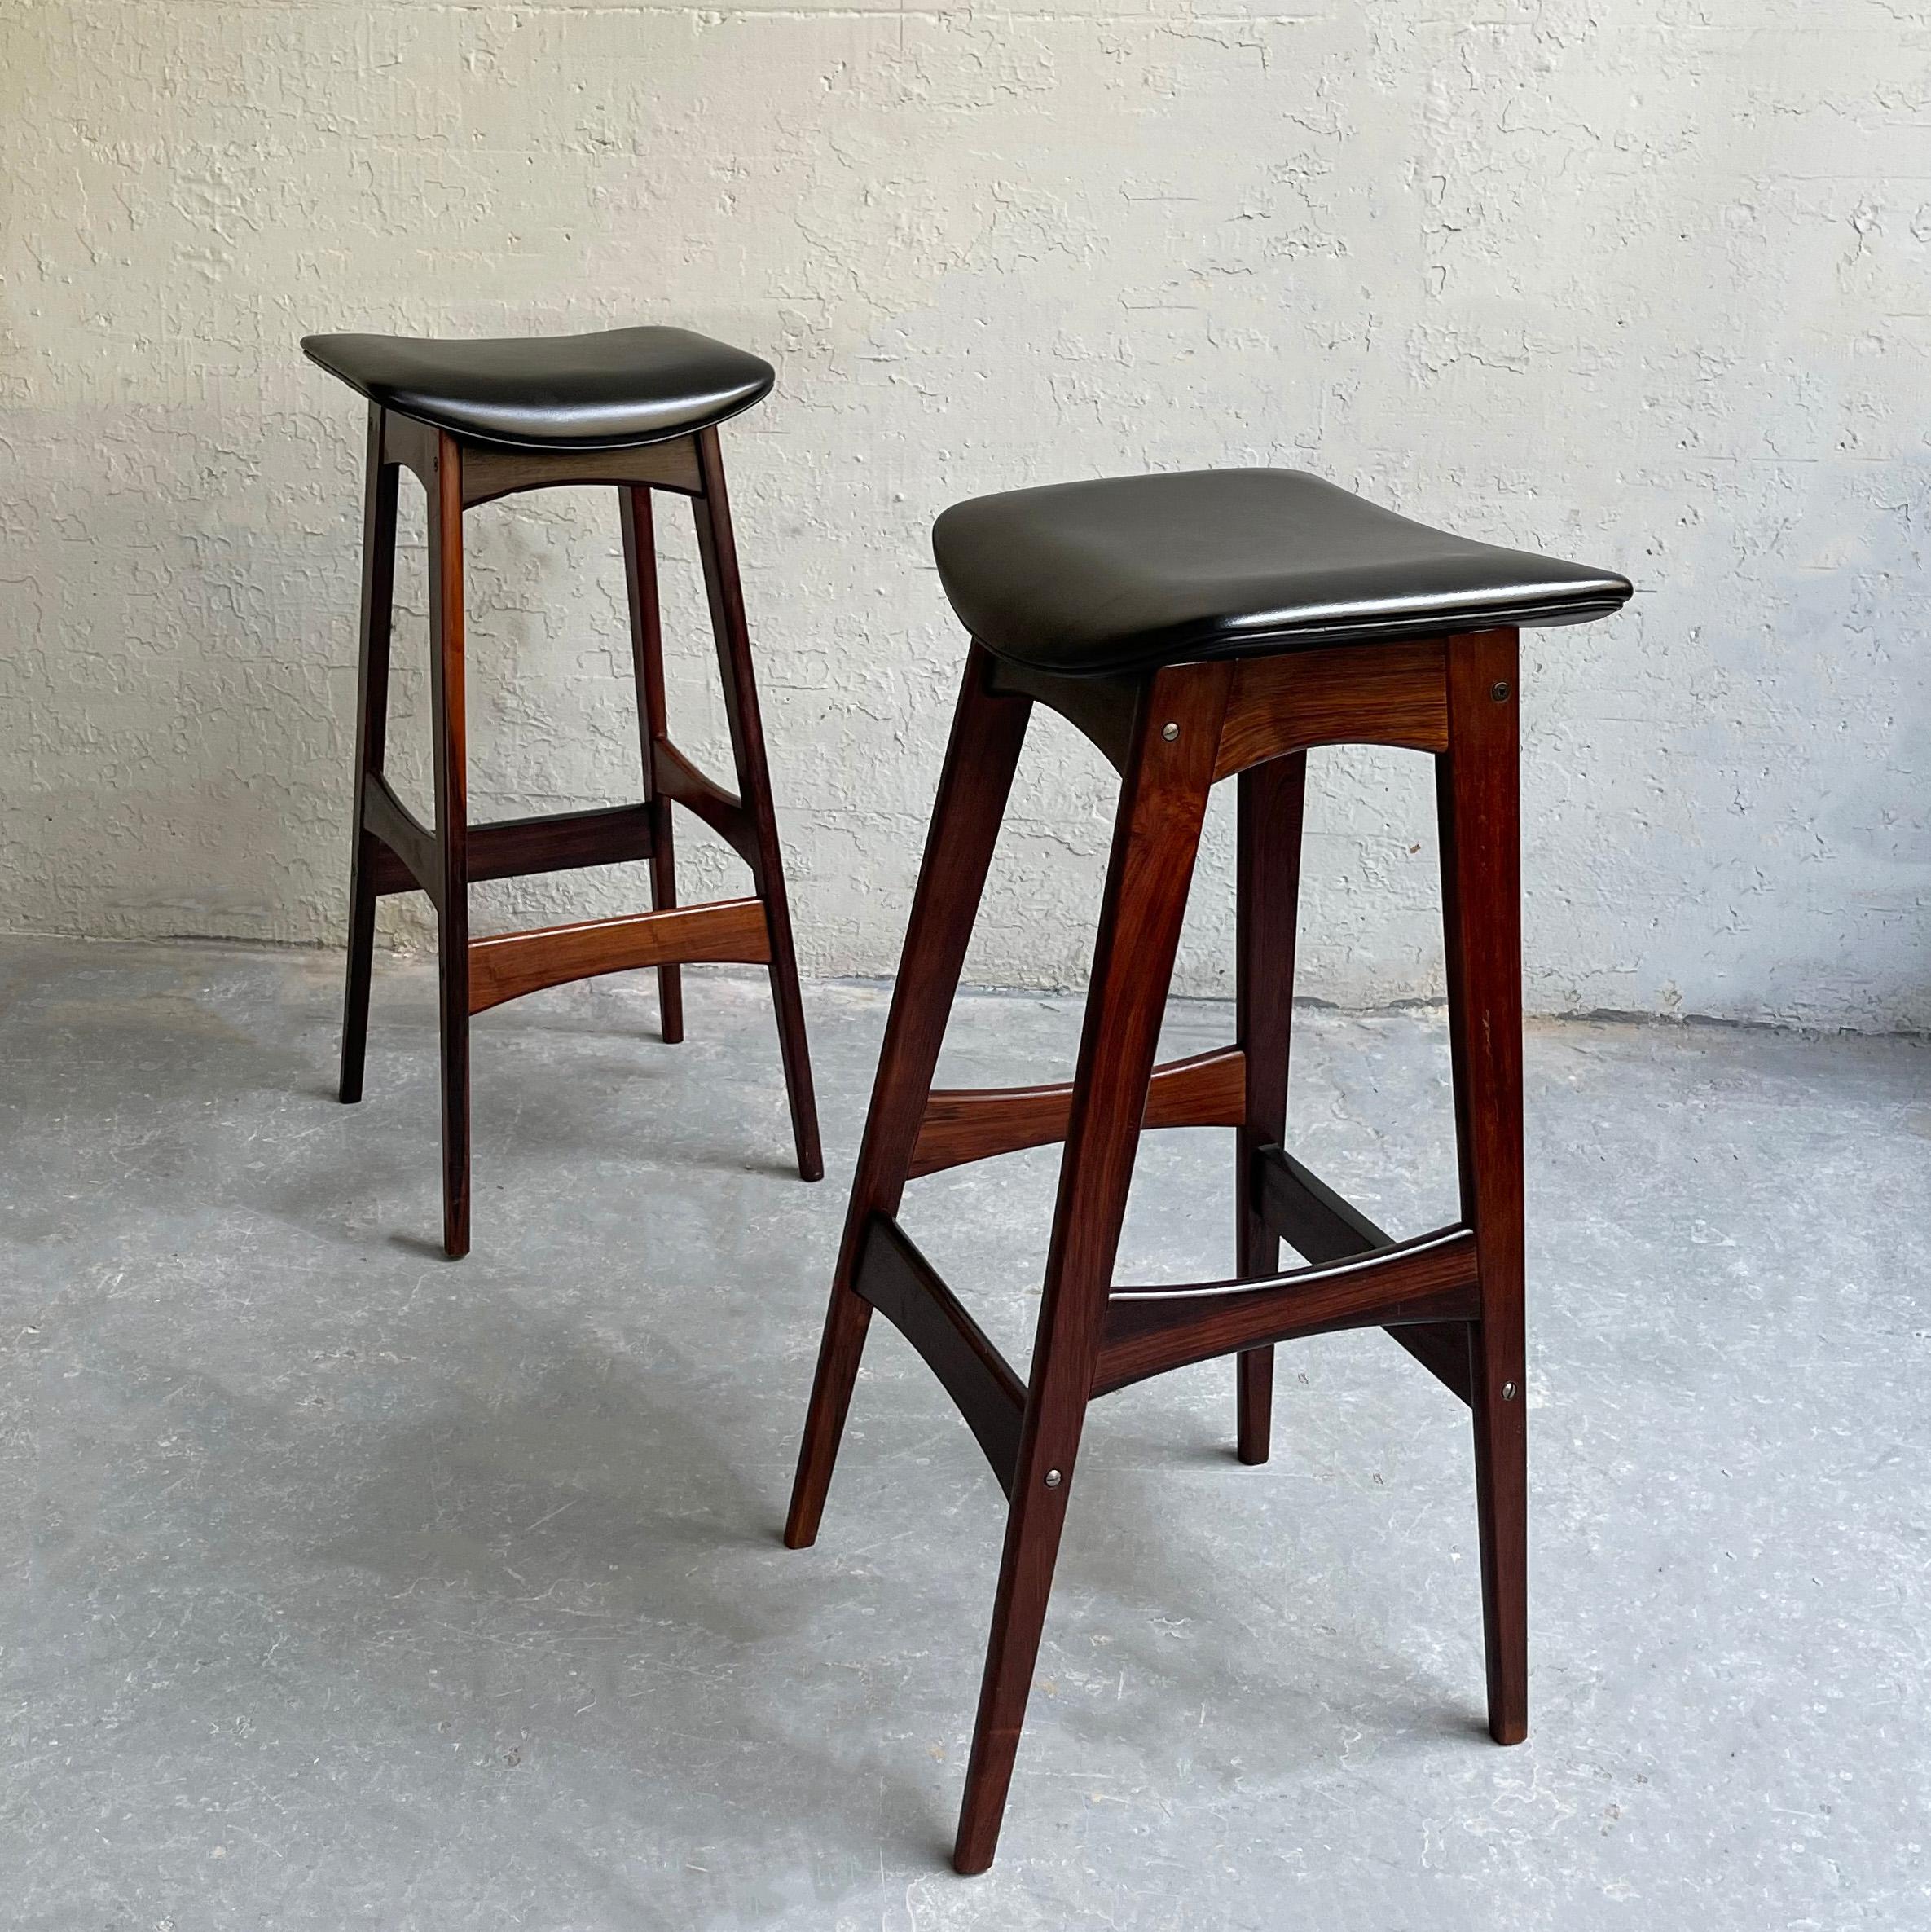 Pair of Danish modern bar stools by Johannes Andersen for BRDR Andersen Vejen feature rosewood frames with black vinyl seats that are 13 inch in depth.